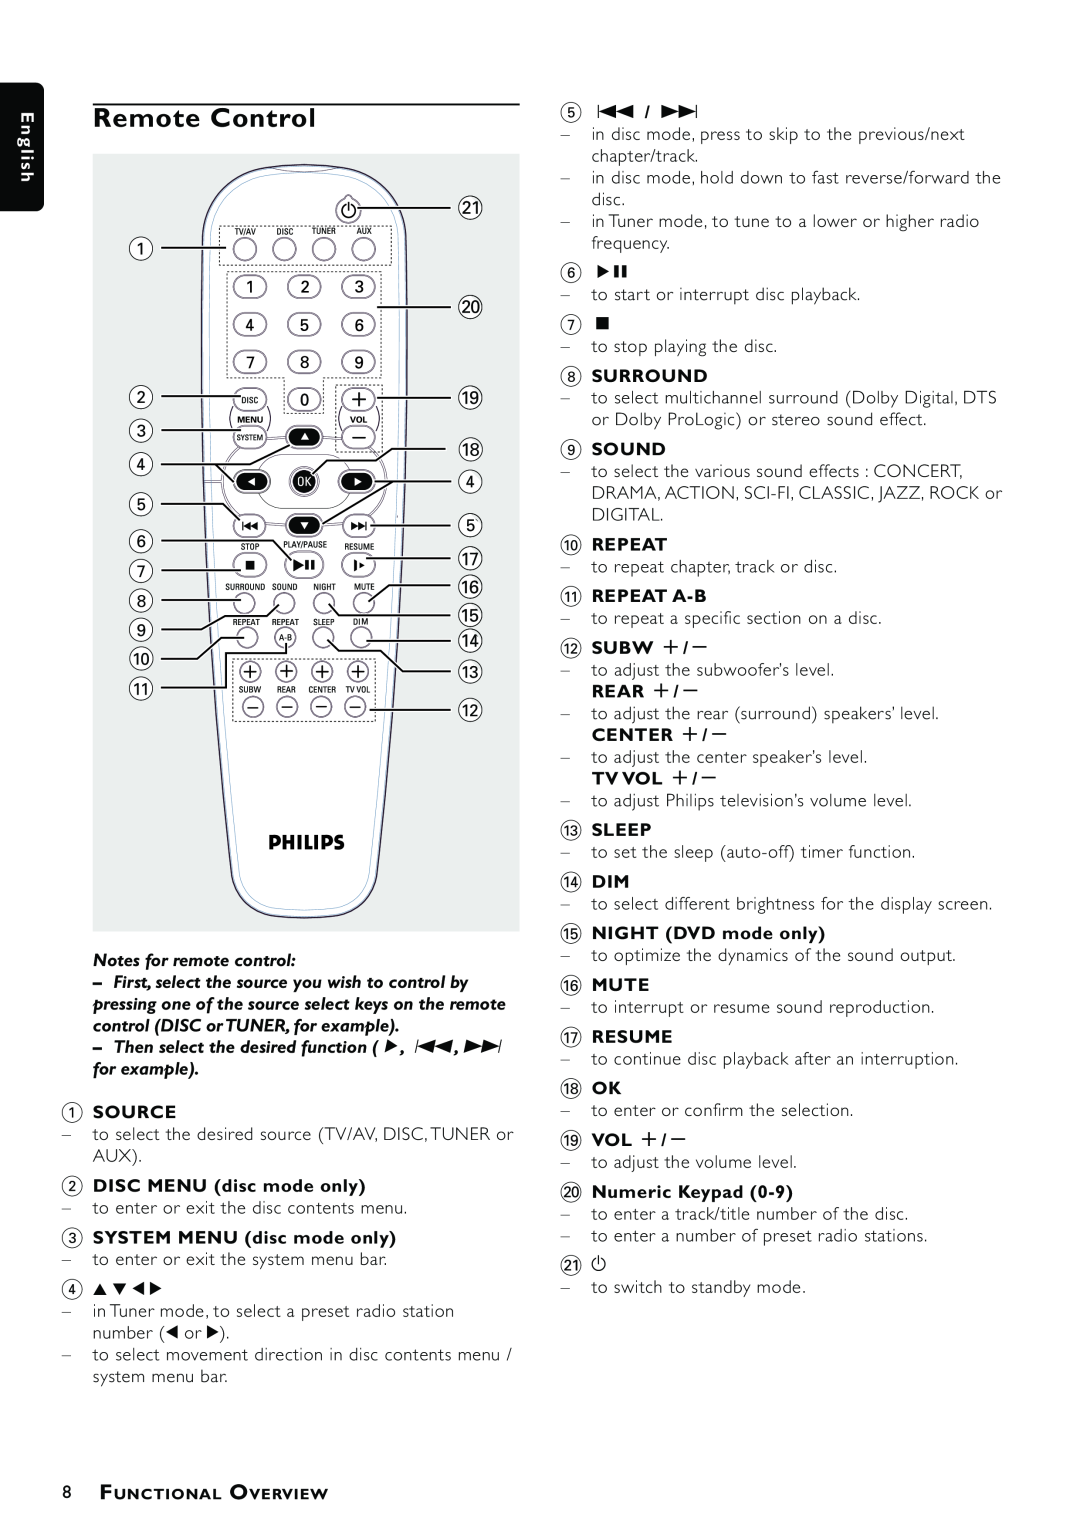 Philips MX3660D Remote Control, Notes for remote control, Then select the desired function É, S , T for example, Source 